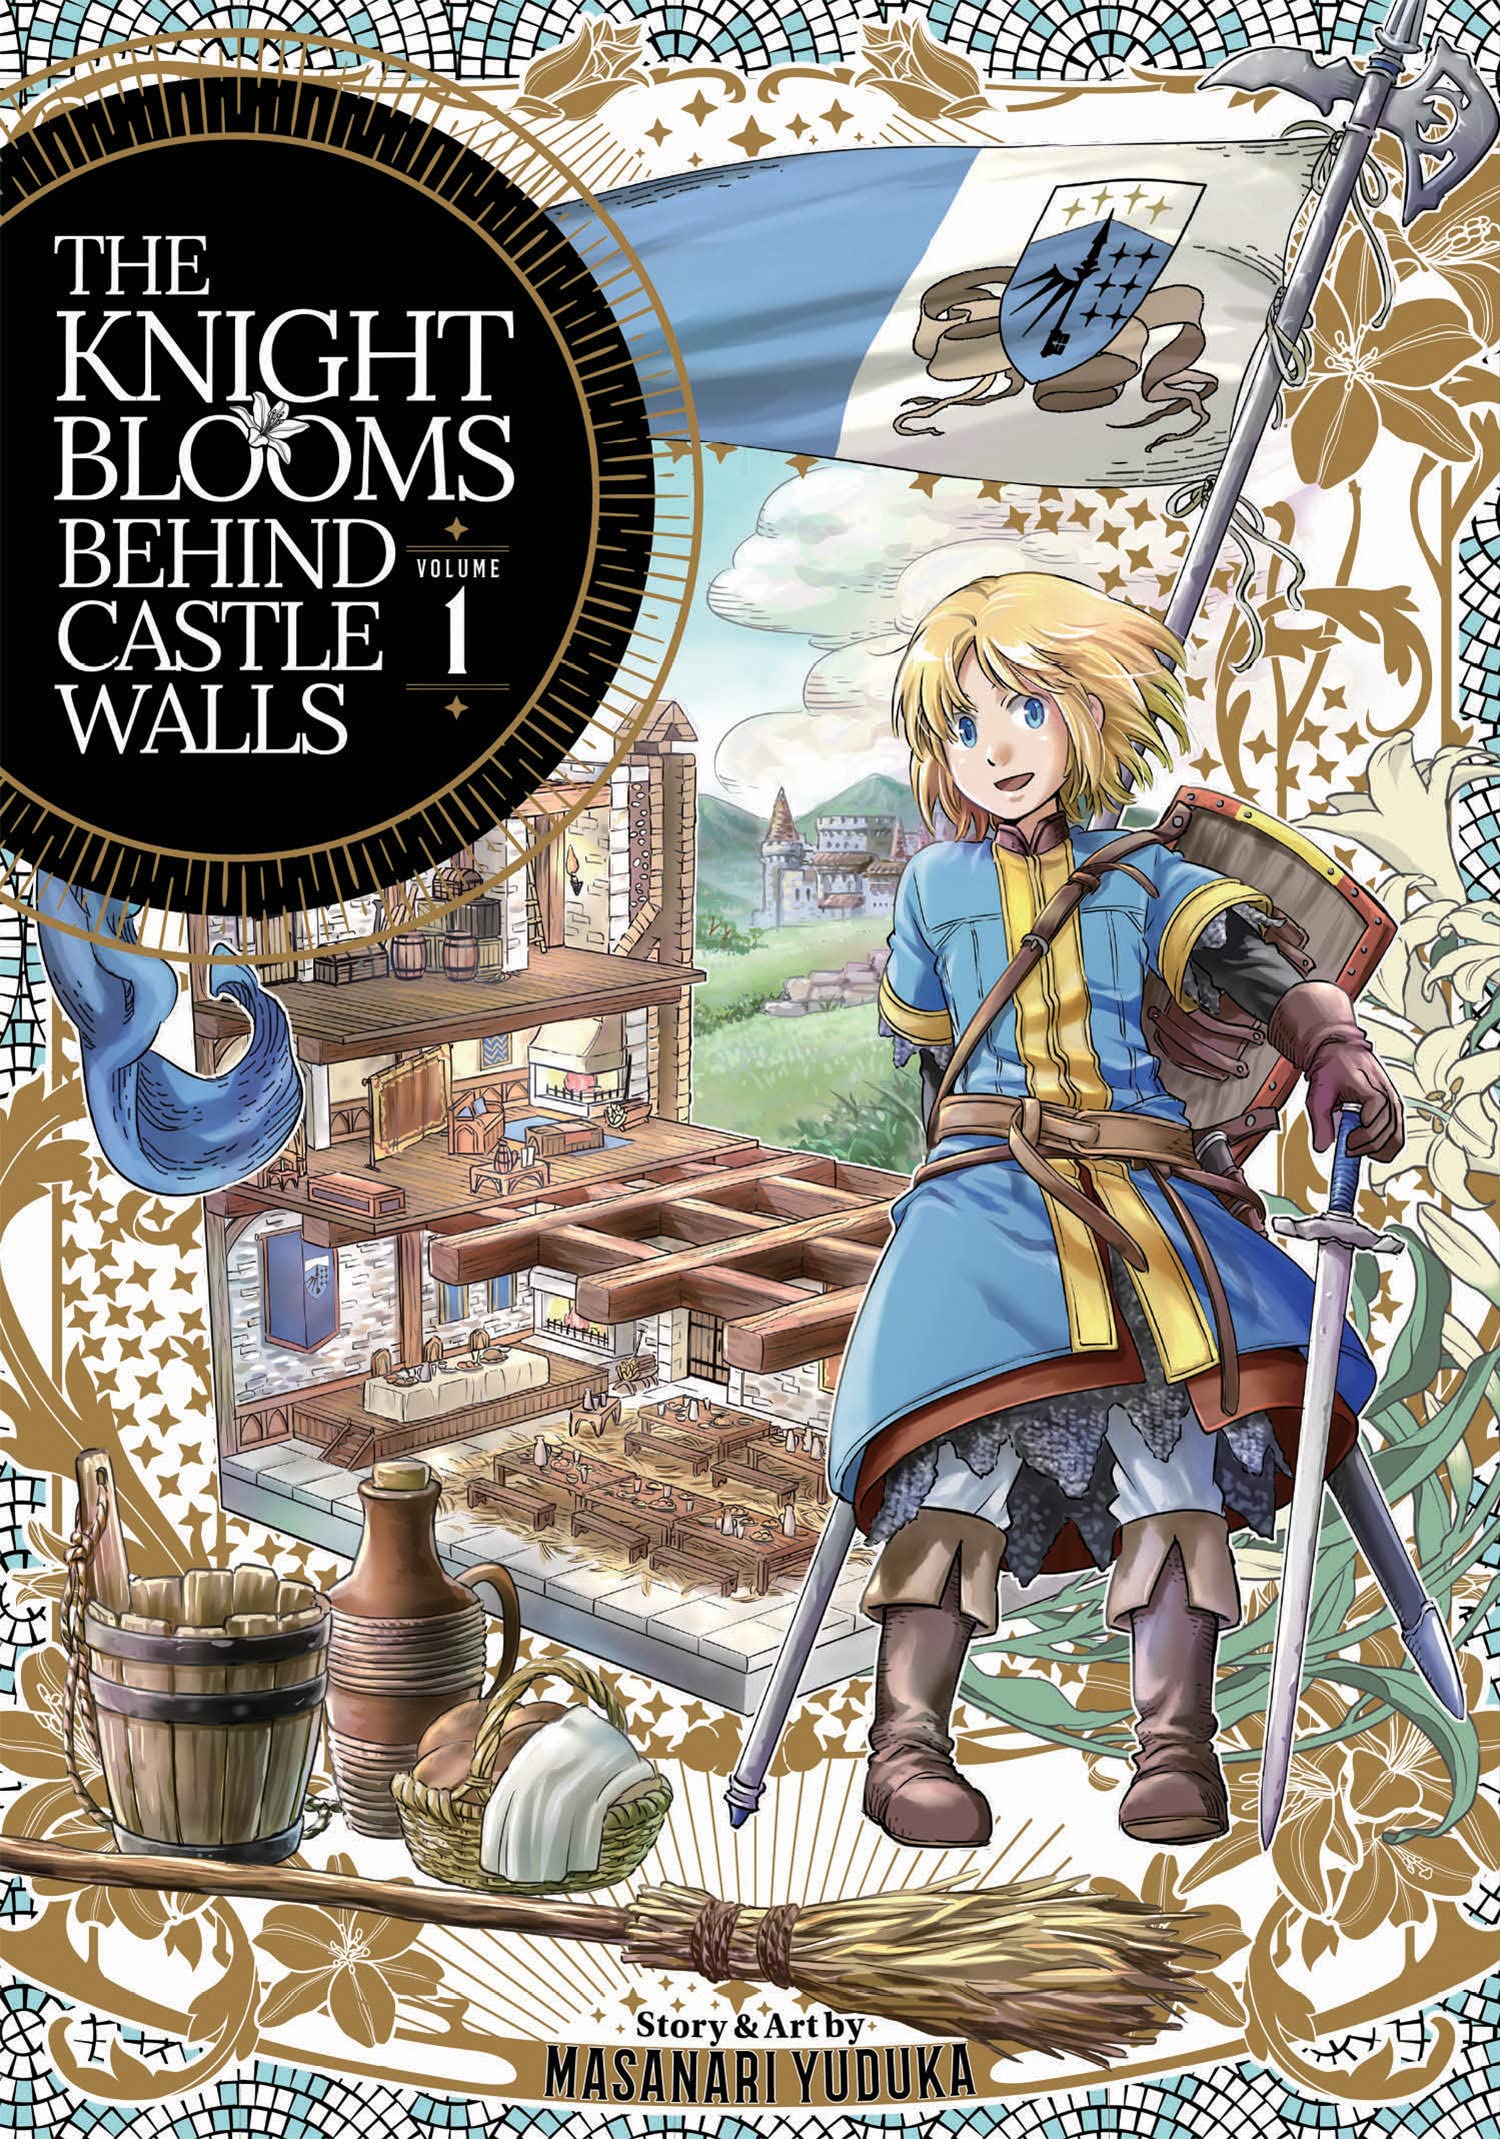 The Knight Blooms Behind Castle Walls Vol. 01